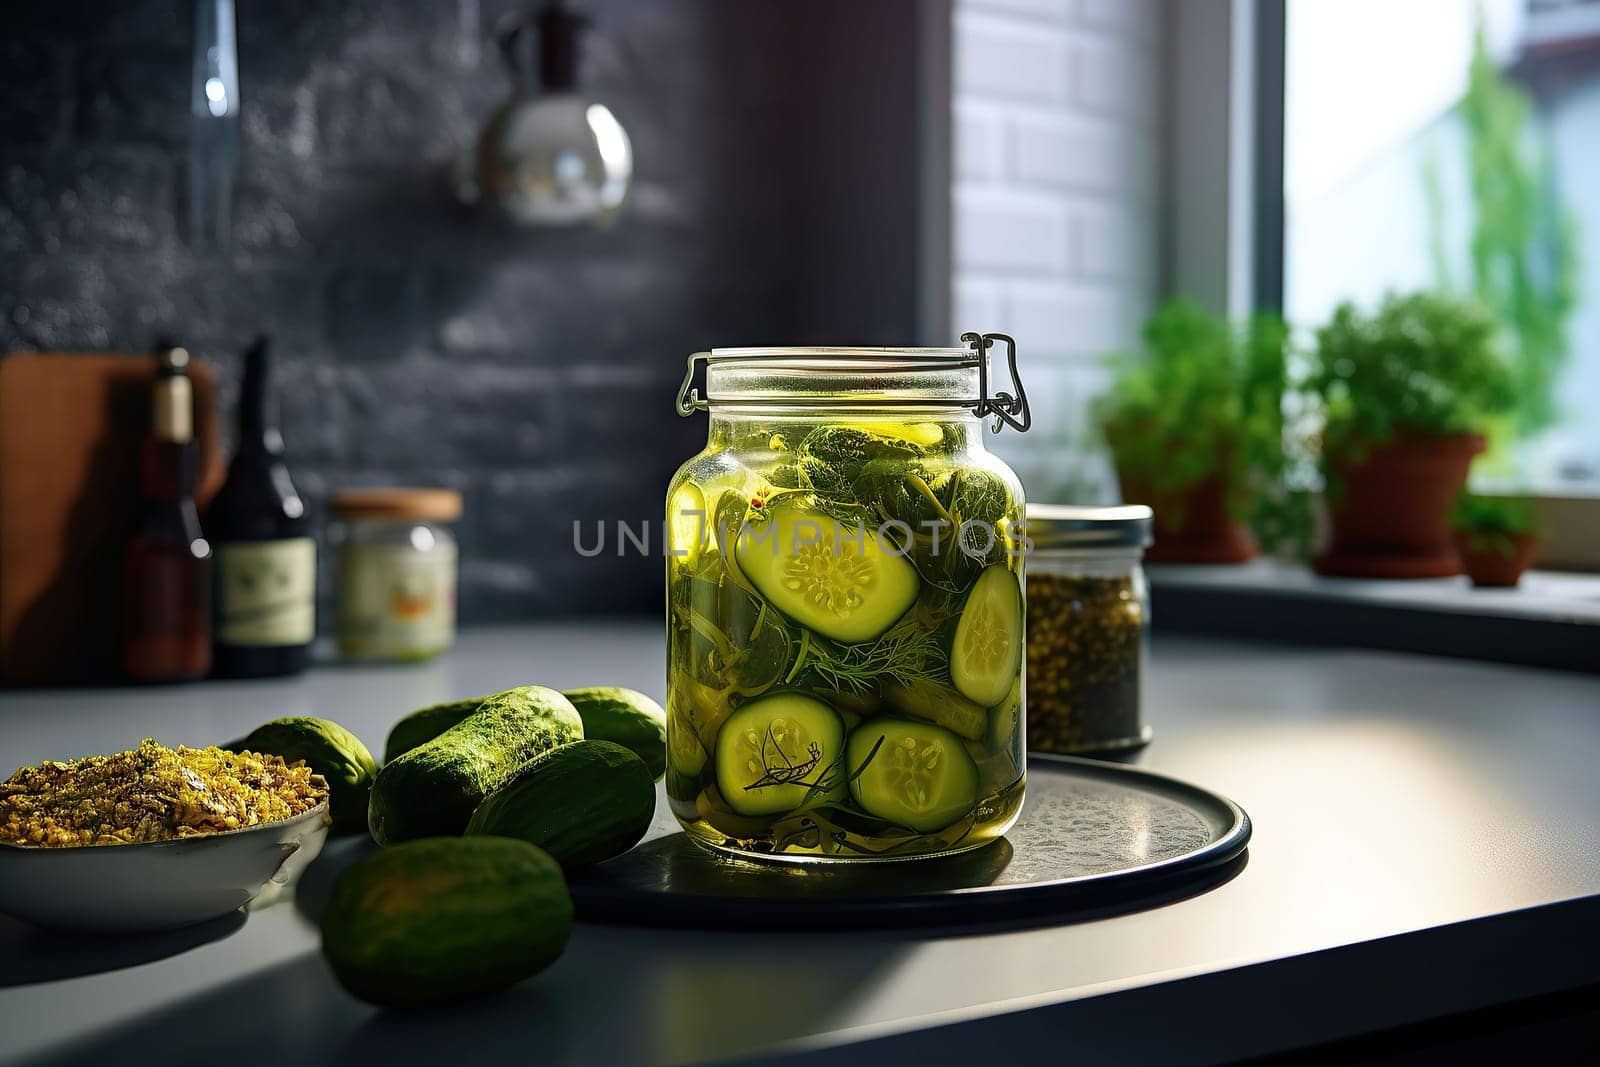 Jar with canned cucumbers and spices on a wooden board after cooking. Place for an inscription or advertising. by Ramanouskaya